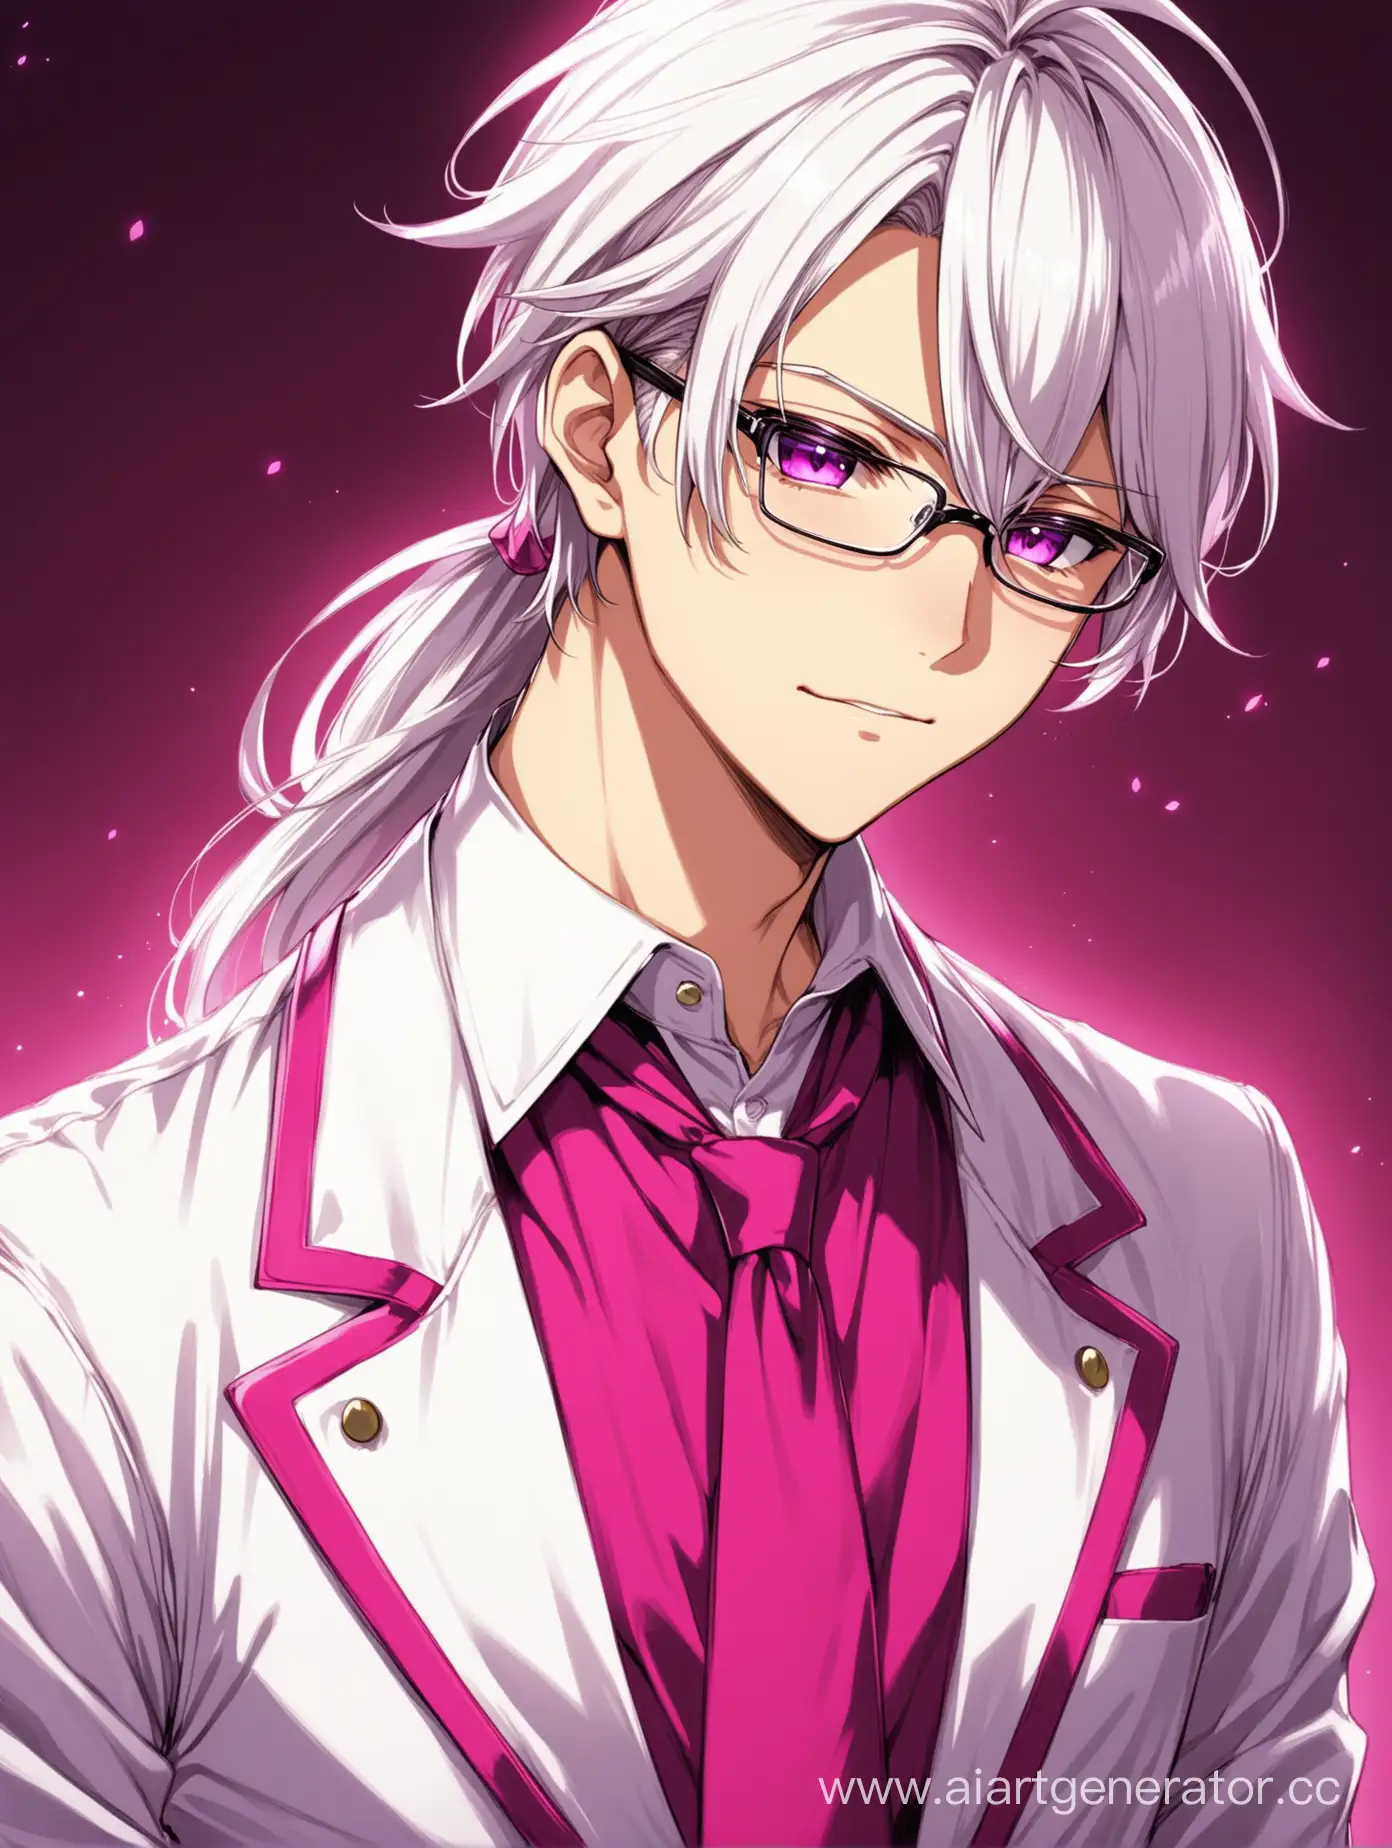 Haughty-Anime-Boy-with-White-Hair-in-Fuchsia-Setting